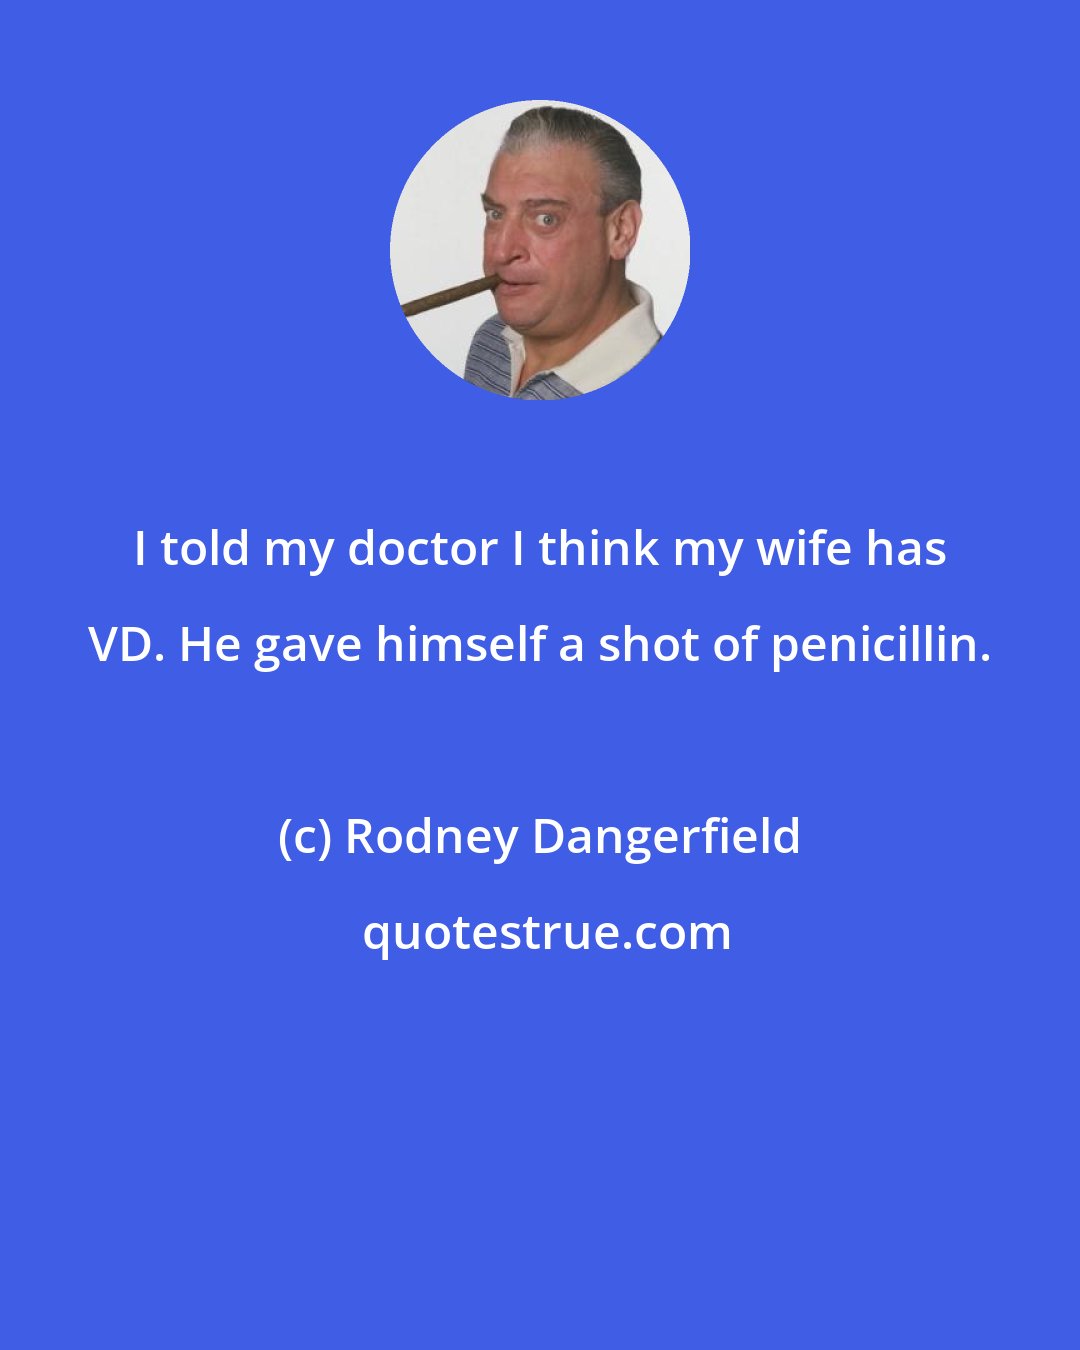 Rodney Dangerfield: I told my doctor I think my wife has VD. He gave himself a shot of penicillin.